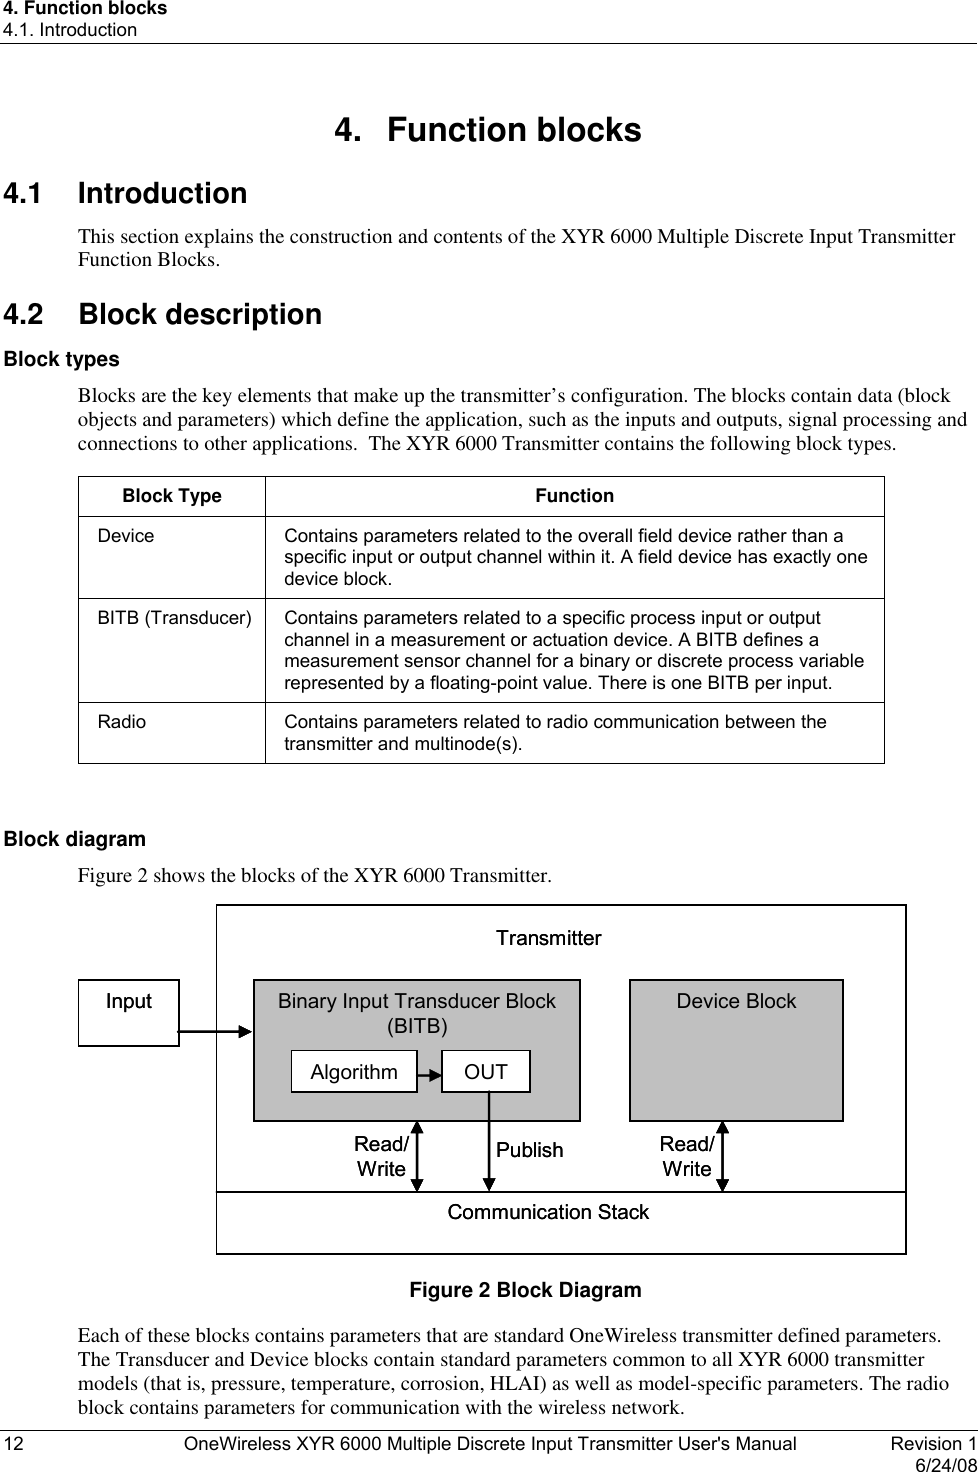 4. Function blocks 4.1. Introduction 12  OneWireless XYR 6000 Multiple Discrete Input Transmitter User&apos;s Manual   Revision 1   6/24/08 4. Function blocks 4.1 Introduction This section explains the construction and contents of the XYR 6000 Multiple Discrete Input Transmitter Function Blocks. 4.2 Block description Block types Blocks are the key elements that make up the transmitter’s configuration. The blocks contain data (block objects and parameters) which define the application, such as the inputs and outputs, signal processing and connections to other applications.  The XYR 6000 Transmitter contains the following block types.  Block Type  Function Device  Contains parameters related to the overall field device rather than a specific input or output channel within it. A field device has exactly one device block. BITB (Transducer)  Contains parameters related to a specific process input or output channel in a measurement or actuation device. A BITB defines a measurement sensor channel for a binary or discrete process variable represented by a floating-point value. There is one BITB per input.   Radio  Contains parameters related to radio communication between the transmitter and multinode(s).   Block diagram Figure 2 shows the blocks of the XYR 6000 Transmitter. Input Binary Input Transducer Block (BITB)TransmitterDevice BlockCommunication StackAlgorithm OUTRead/Write Publish Read/WriteInput Binary Input Transducer Block (BITB)TransmitterDevice BlockCommunication StackAlgorithm OUTRead/Write Publish Read/Write Figure 2 Block Diagram Each of these blocks contains parameters that are standard OneWireless transmitter defined parameters. The Transducer and Device blocks contain standard parameters common to all XYR 6000 transmitter models (that is, pressure, temperature, corrosion, HLAI) as well as model-specific parameters. The radio block contains parameters for communication with the wireless network.  